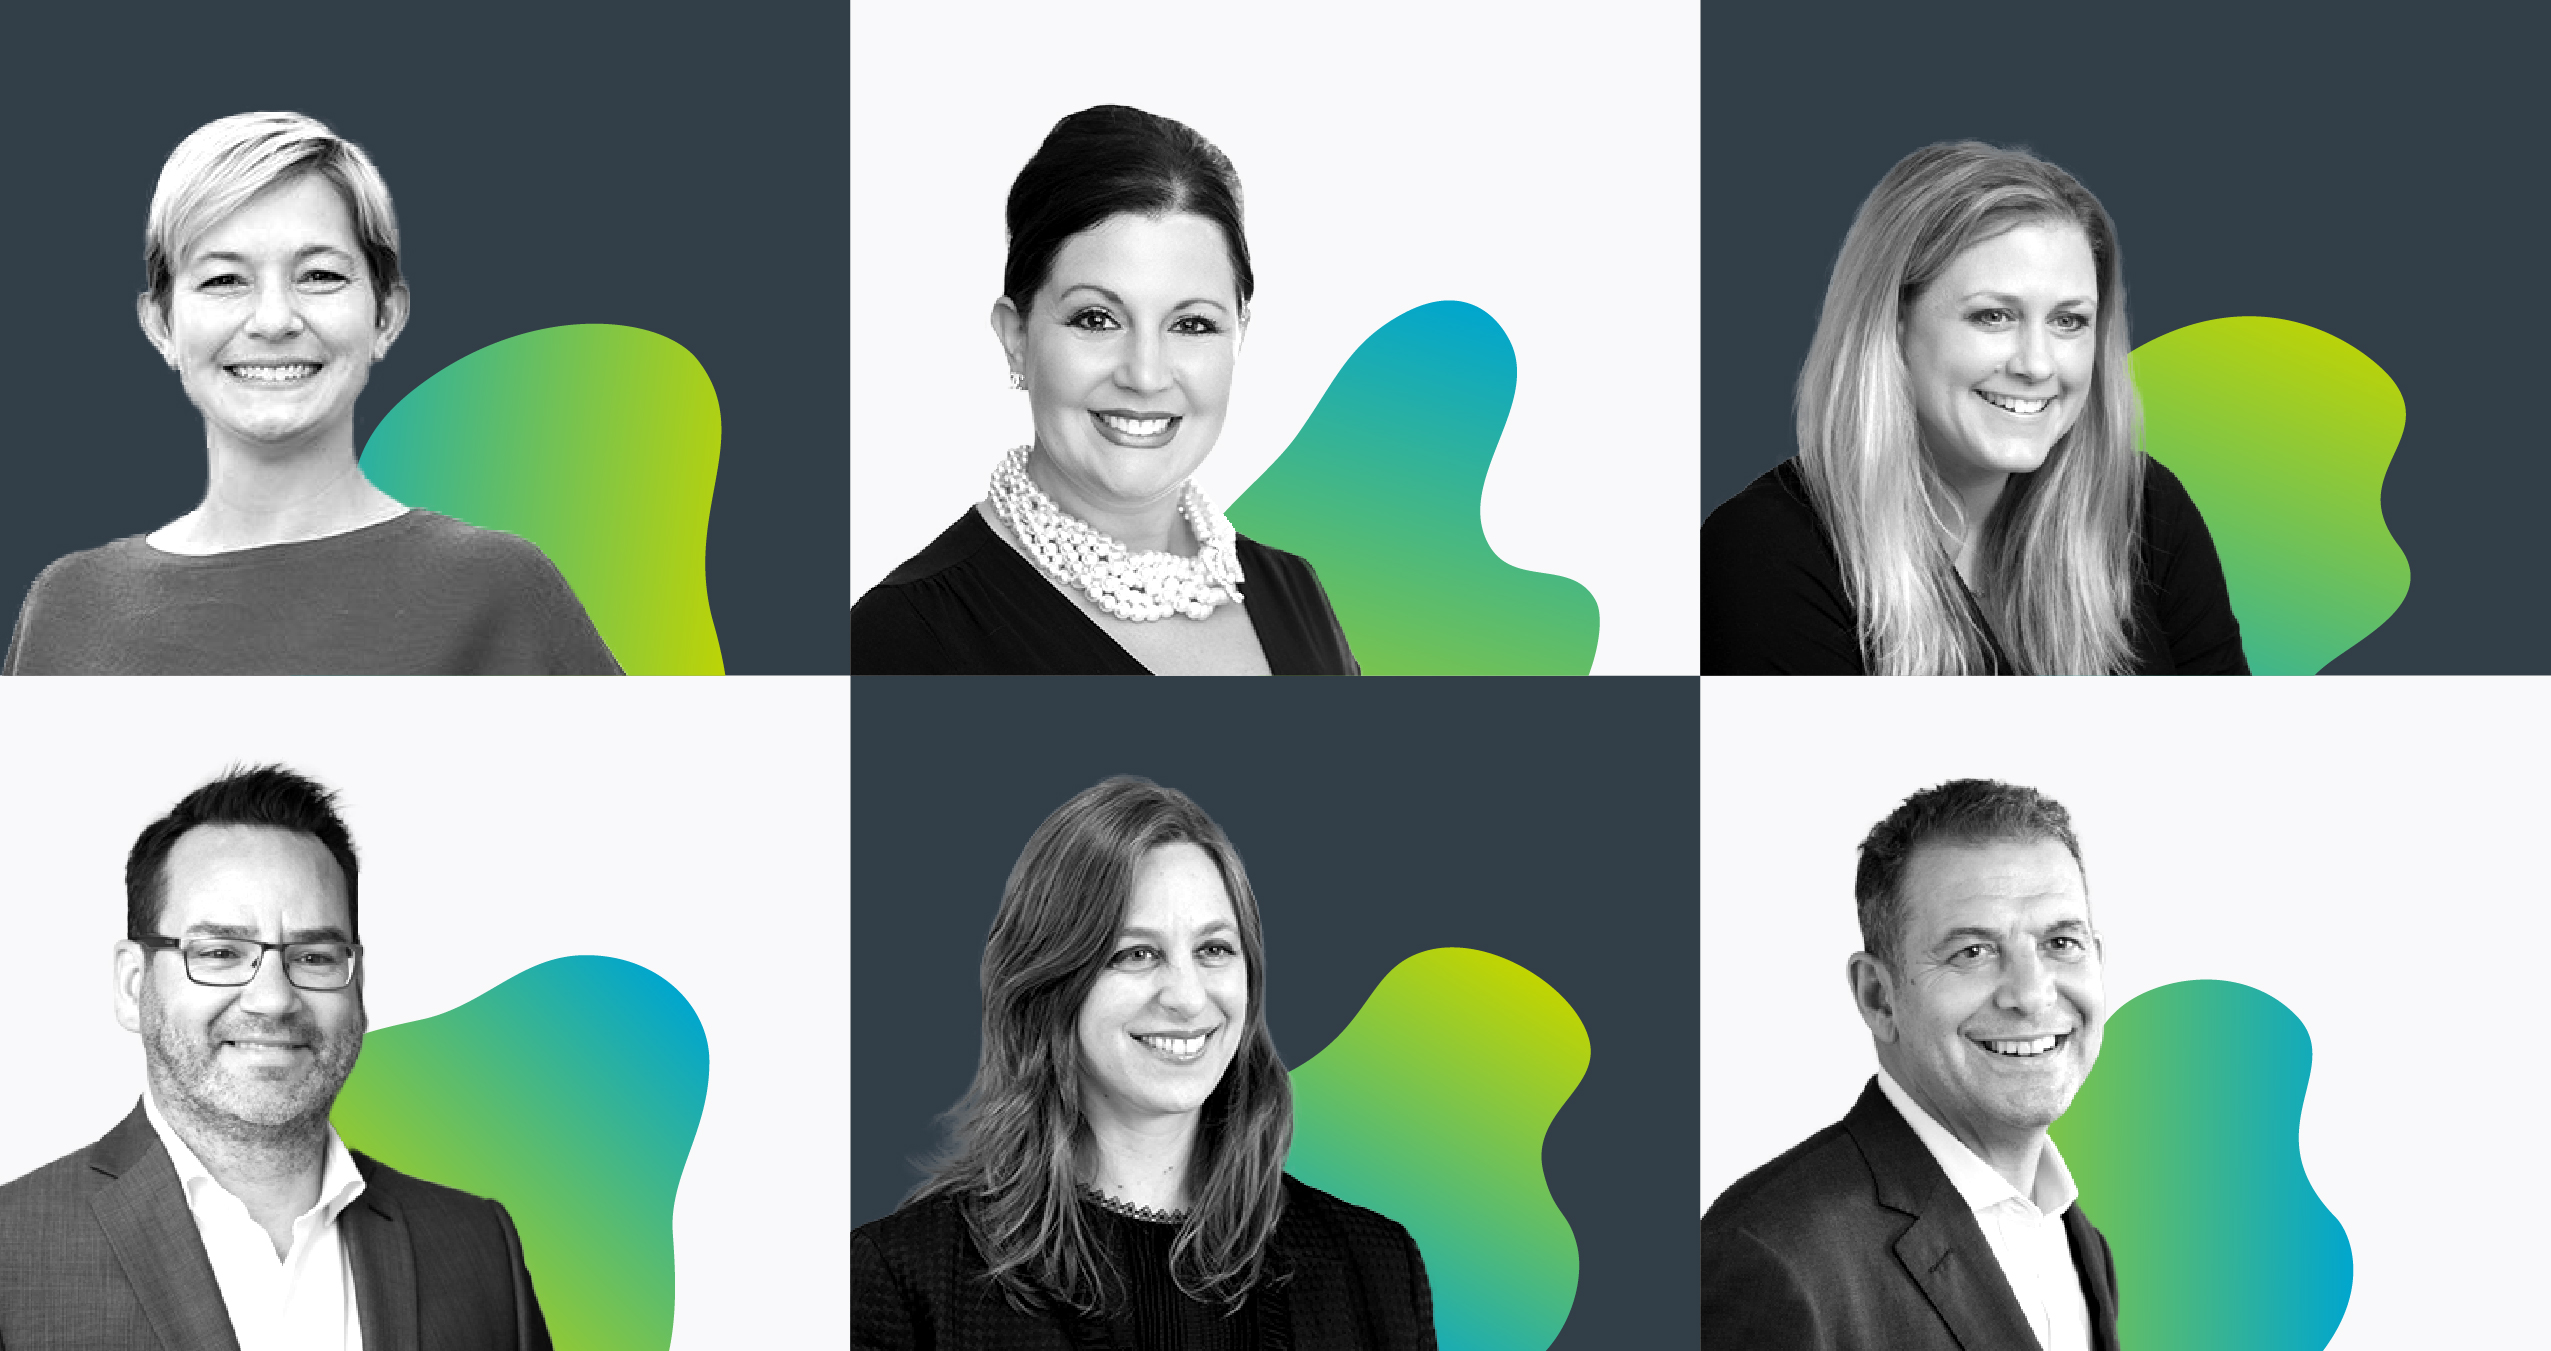 [Image (From top left to bottom right): Avalere’s leadership team, including Kelly Brantley, Policy Practice Director; Sarah Alwardt, Healthcare Transformation Practice Director; Elizabeth Carpenter, President; Lance Grady, Market Access Practice Director; Miryam Frieder, Policy Practice Director; Rob Carter, Financial Services Practice Director.]  